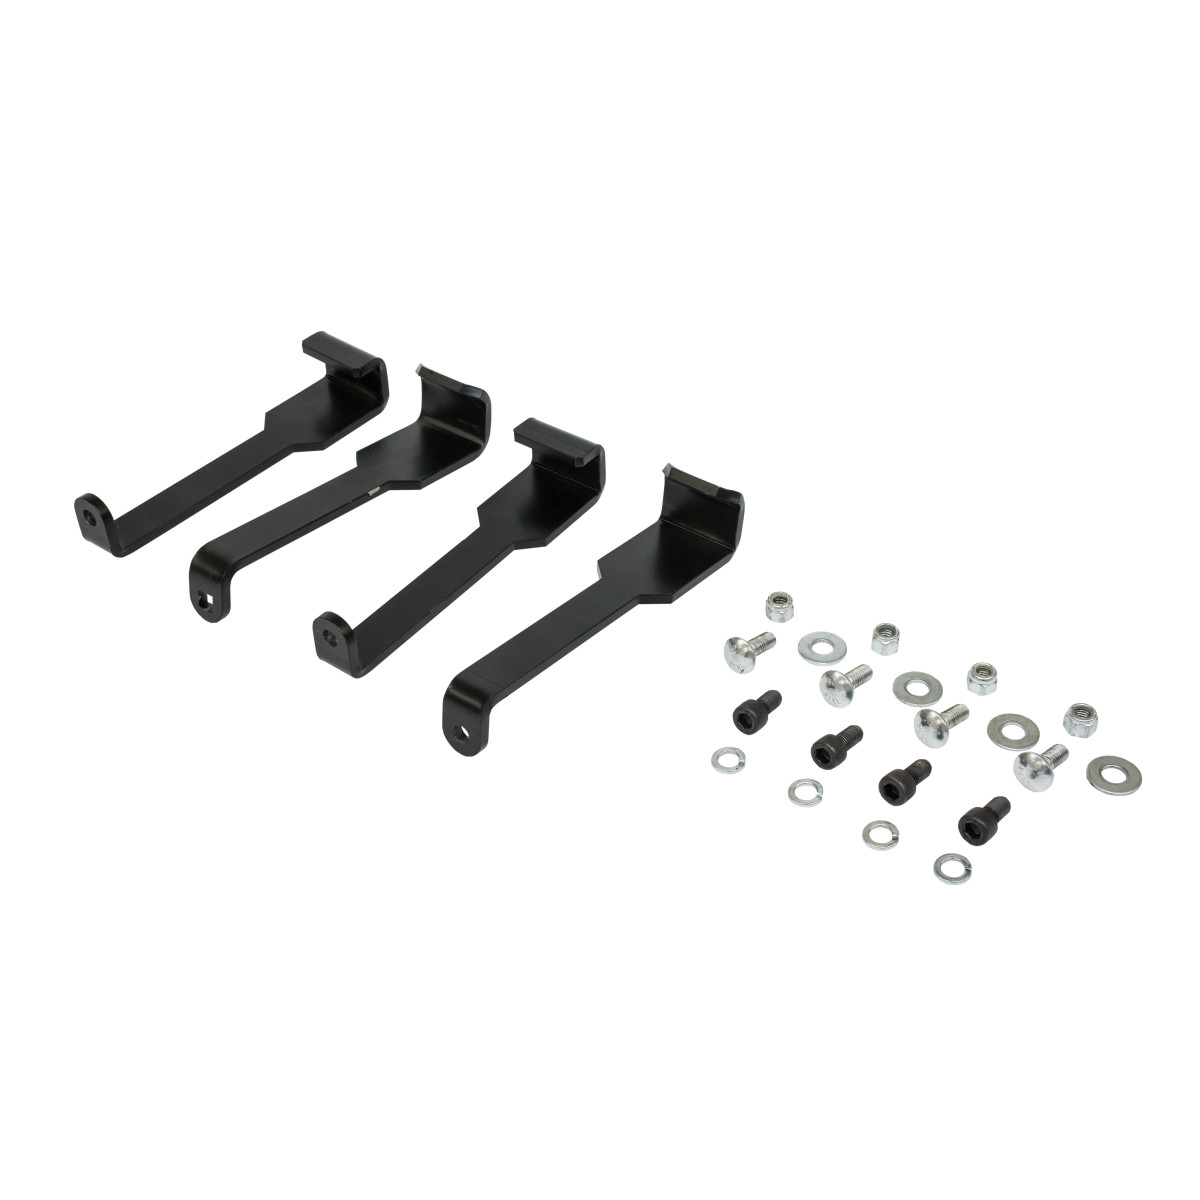 Workhorse™ Bender Mounting Kit for use with 855GX and 854DX.  4 brackets, for use with Workhorse™ All-In-One Bending and Threading Workstation.